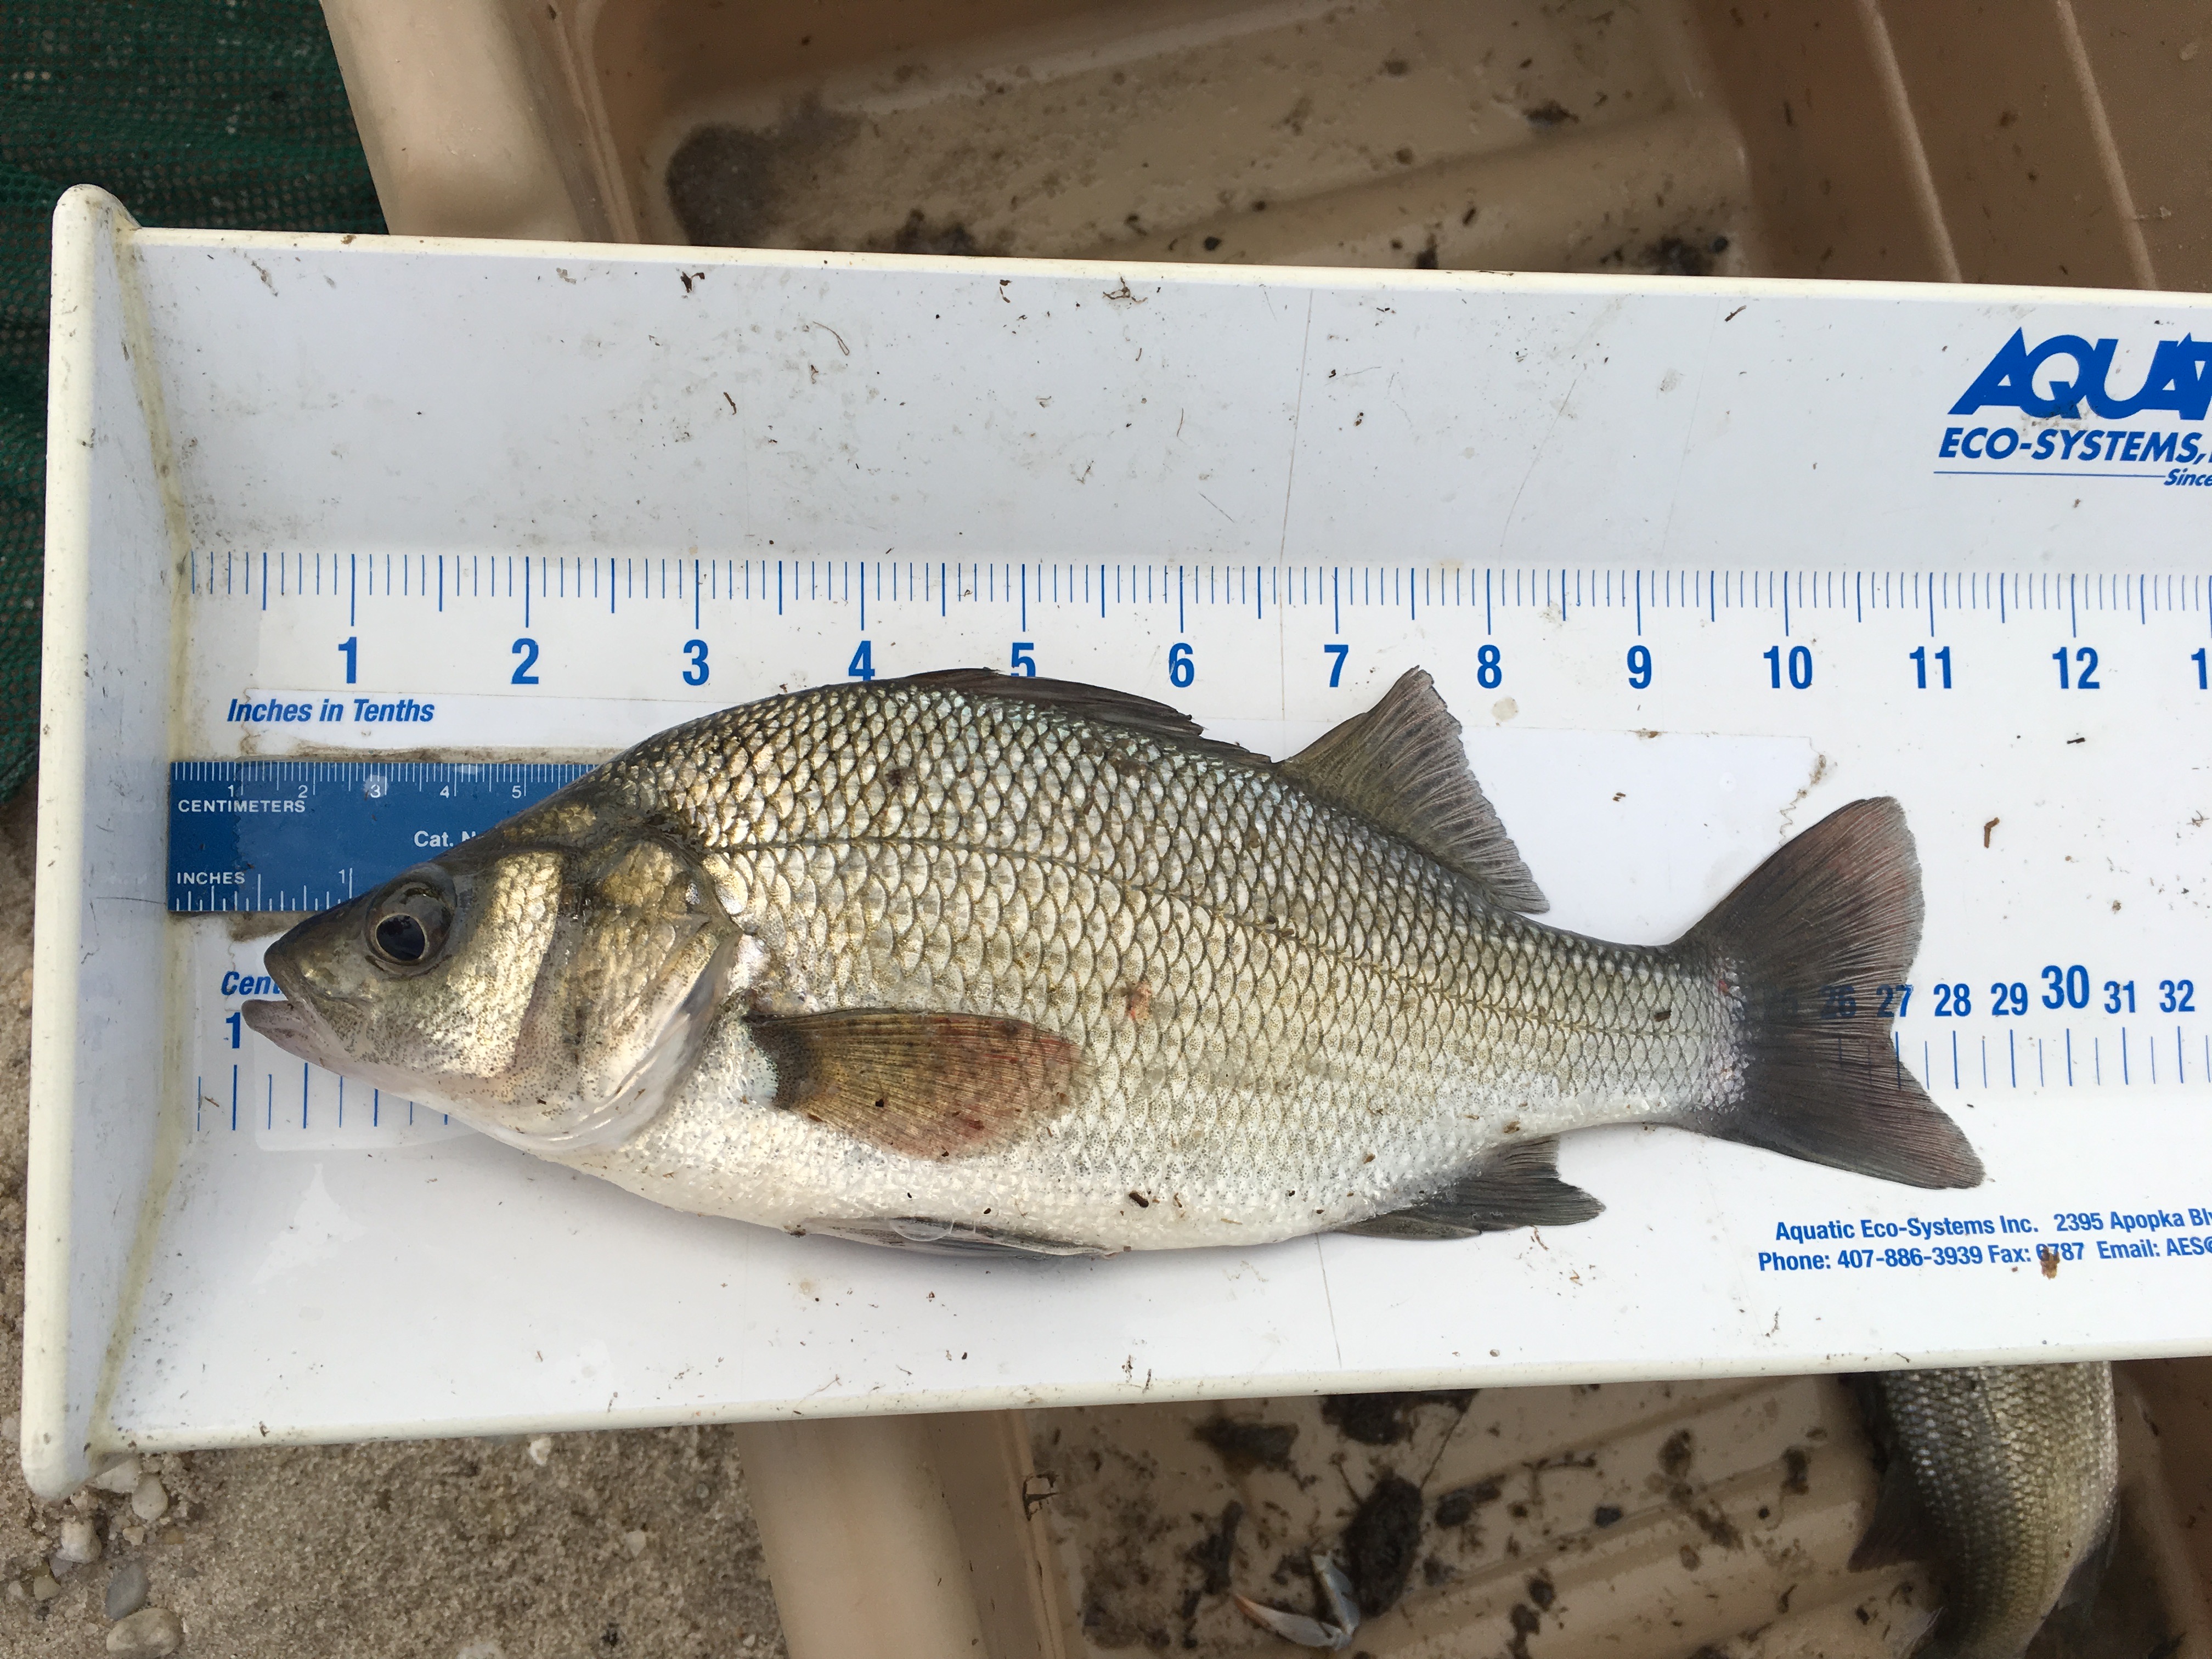 Large, adult white perch (Morone americana) collected from a living shoreline project site.